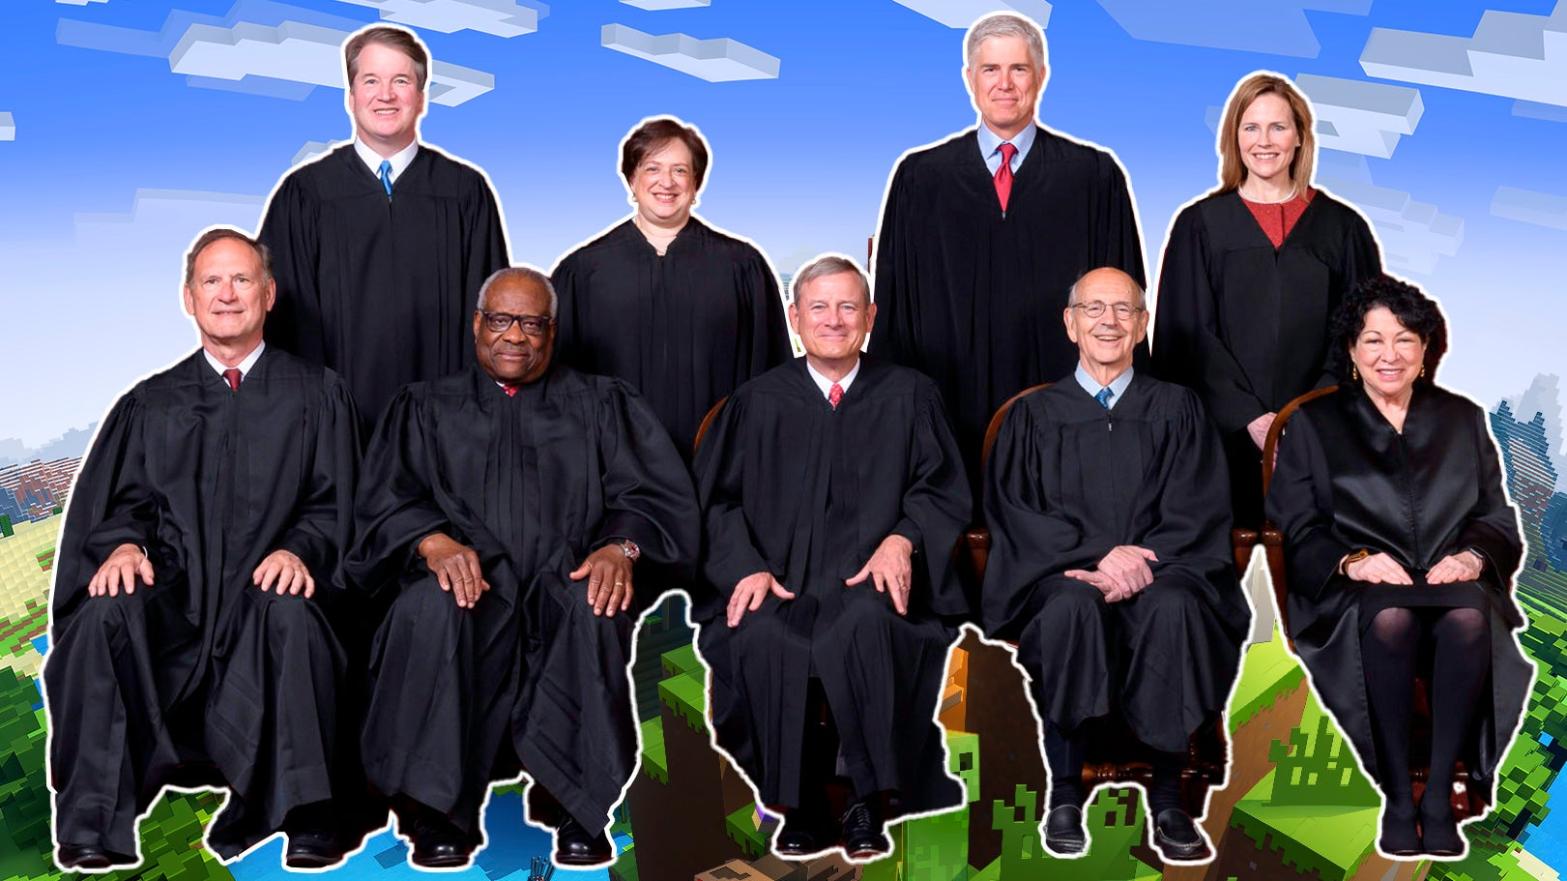 Image: Fred Schilling / Collection of the Supreme Court of the United States / Mojang / Kotaku